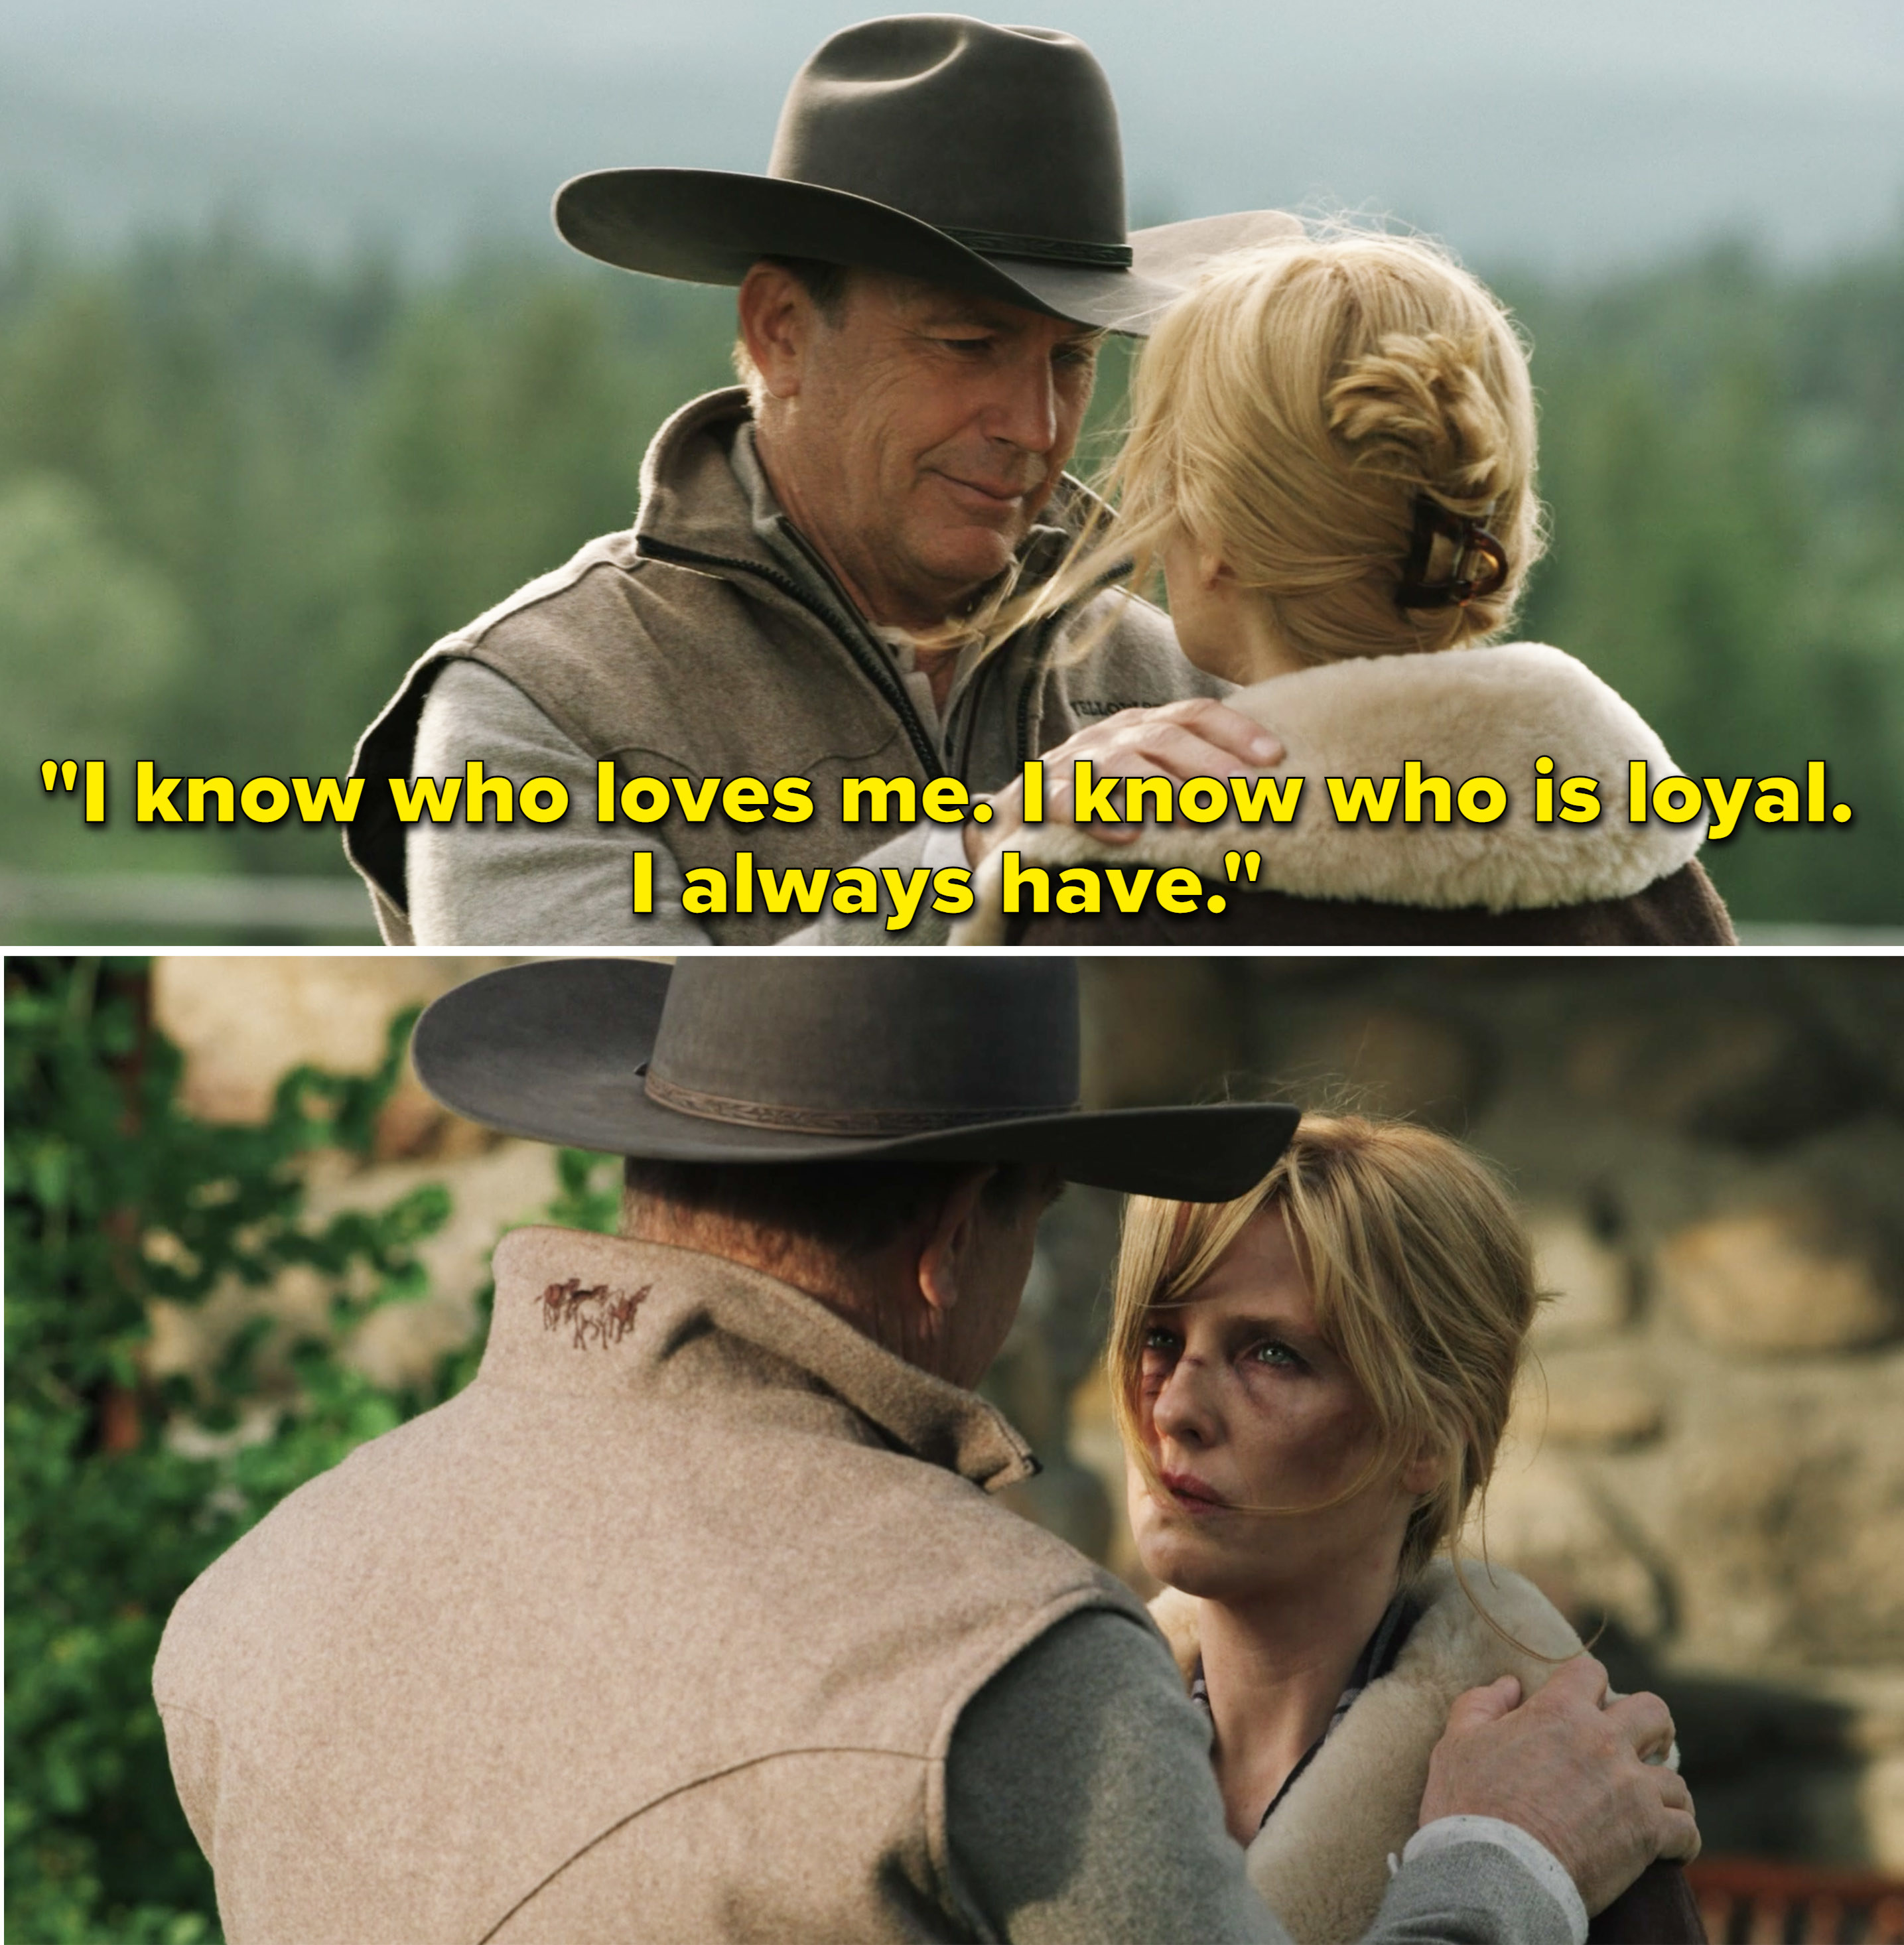 John telling Beth, &quot;I know who loves me. I know who is loyal. I always have.&quot;